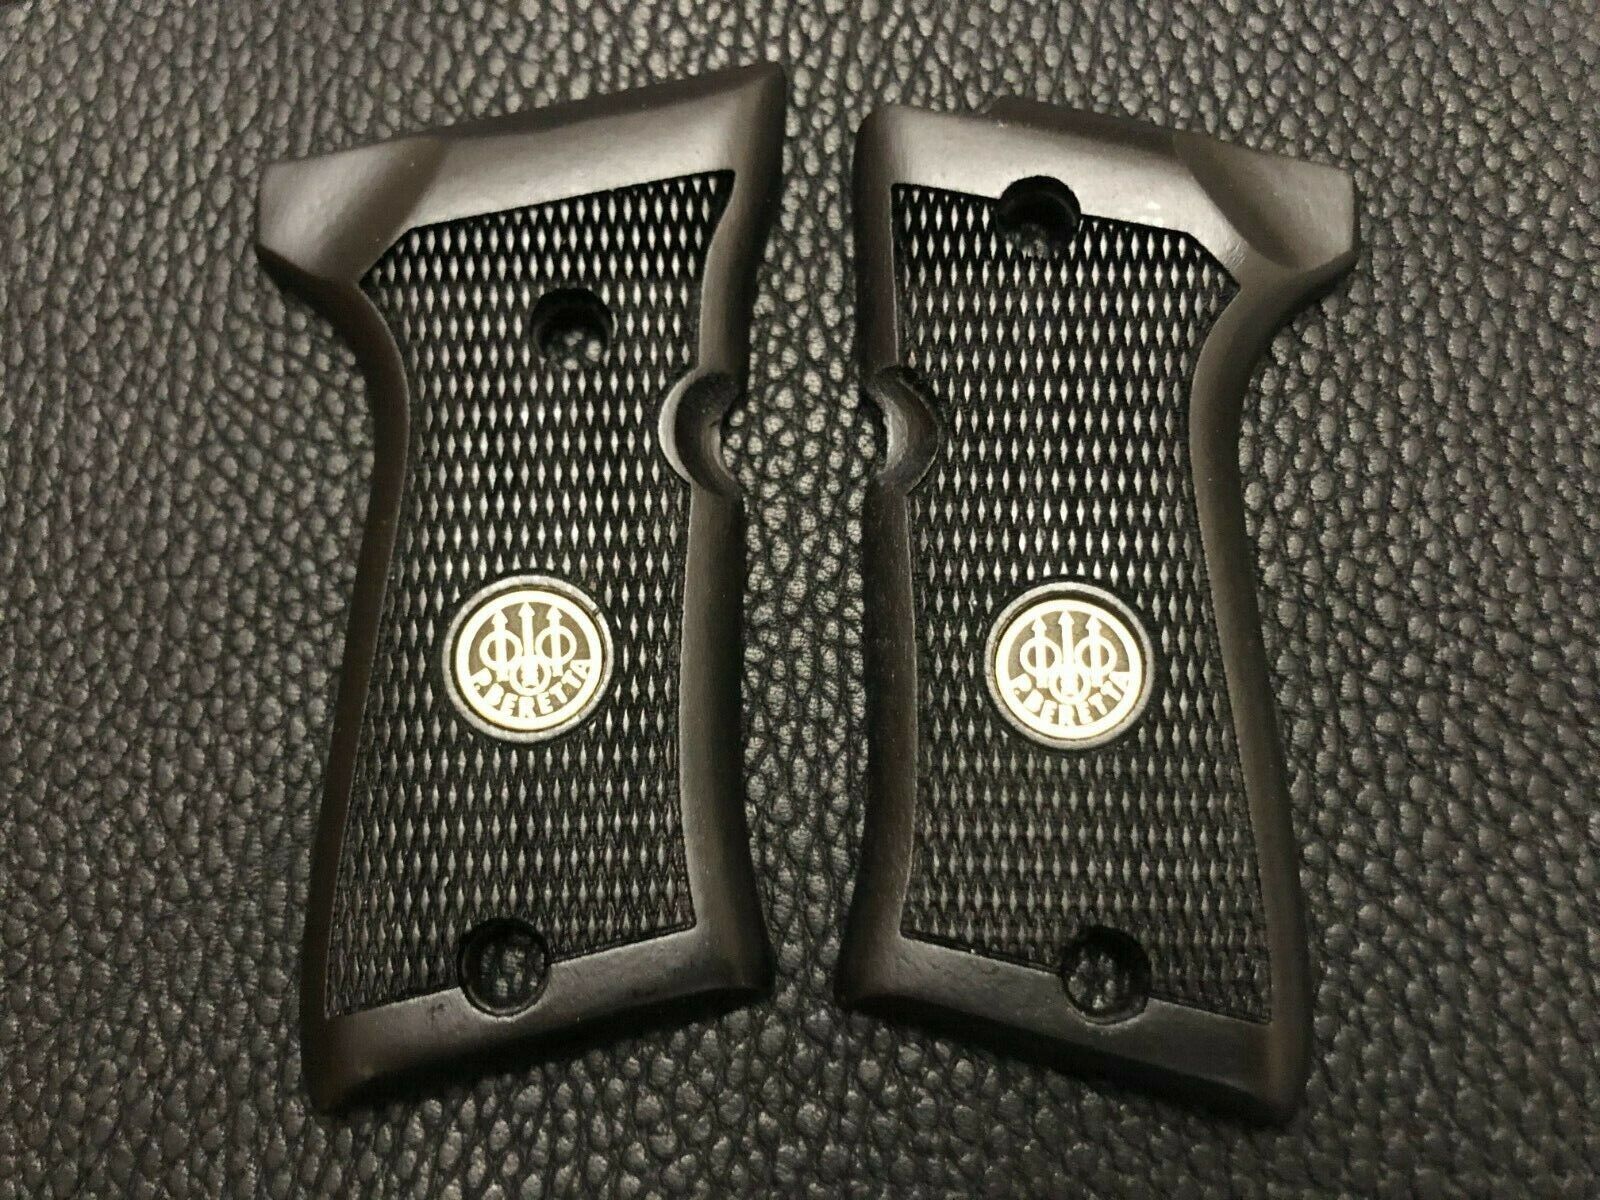 BERETTA COMPACT 92-96 WALNUT WOOD GRIPS SET FAST SHIPPING 2-7 DAY DELIVERY